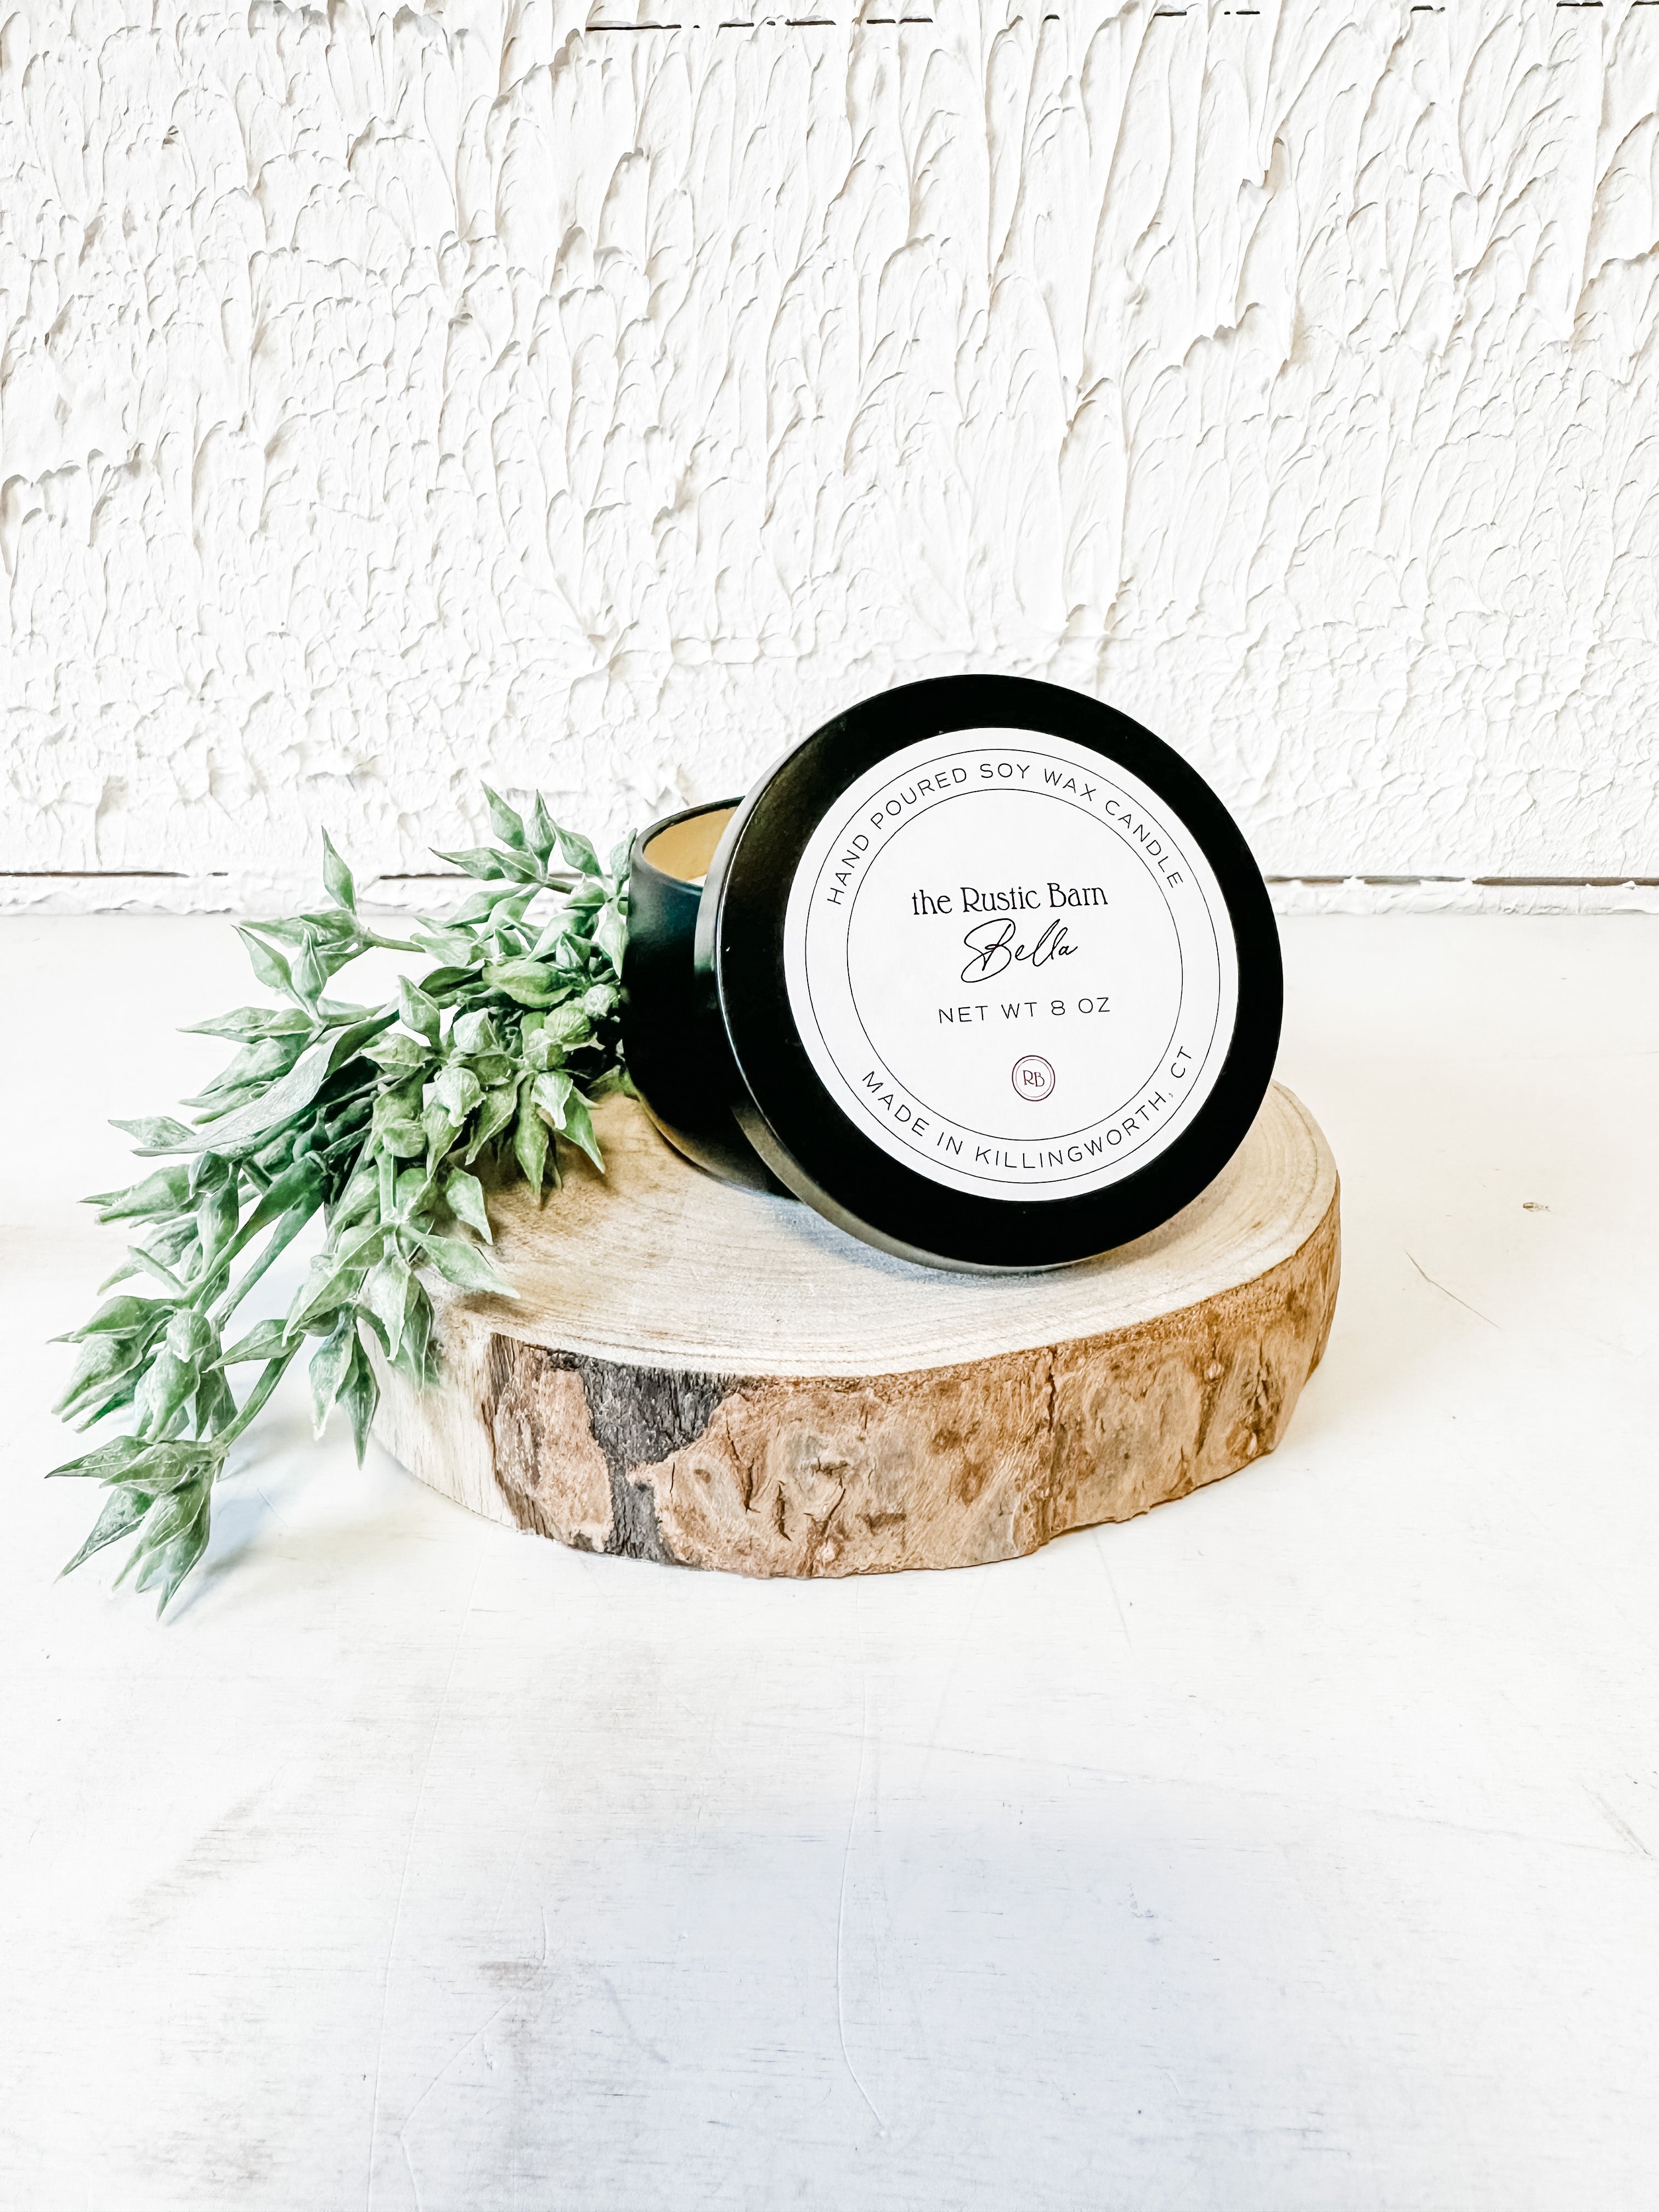 Bella Hand Poured Soy Candle